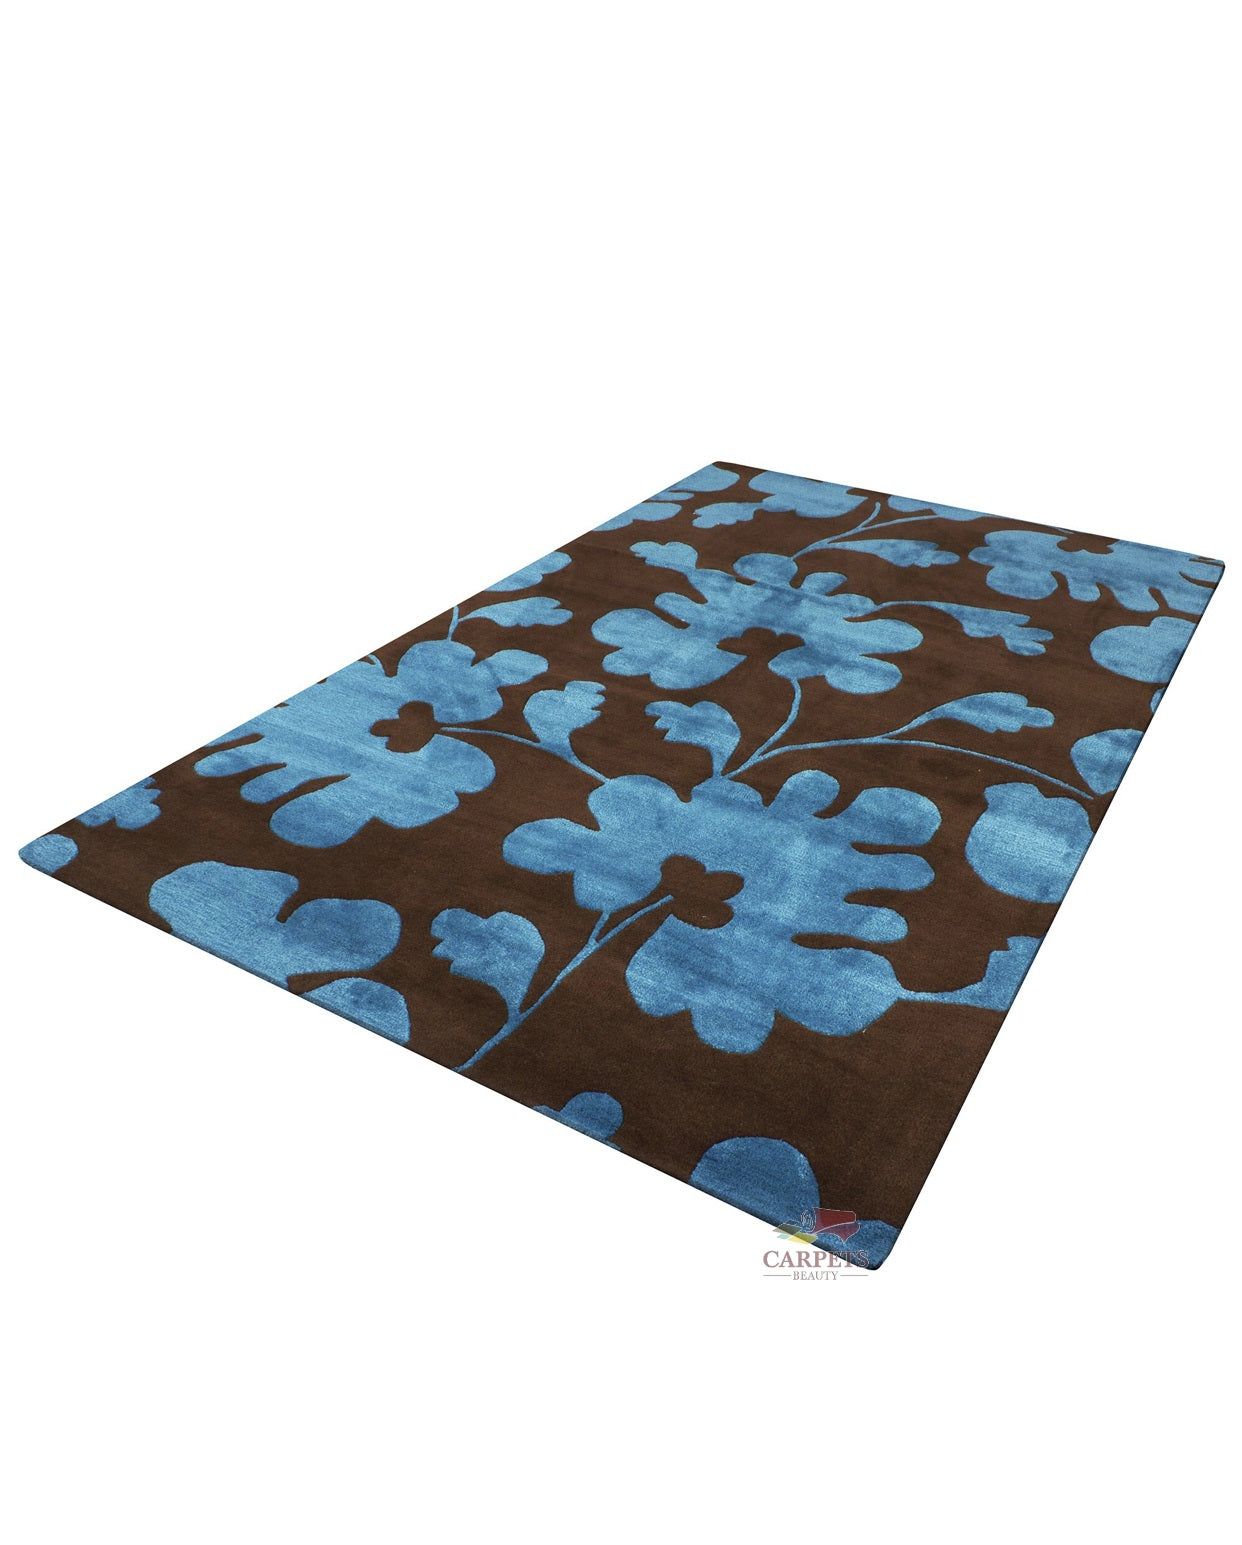 Attractive Blue Floral Woolen Carpets for bedrooms and living rooms